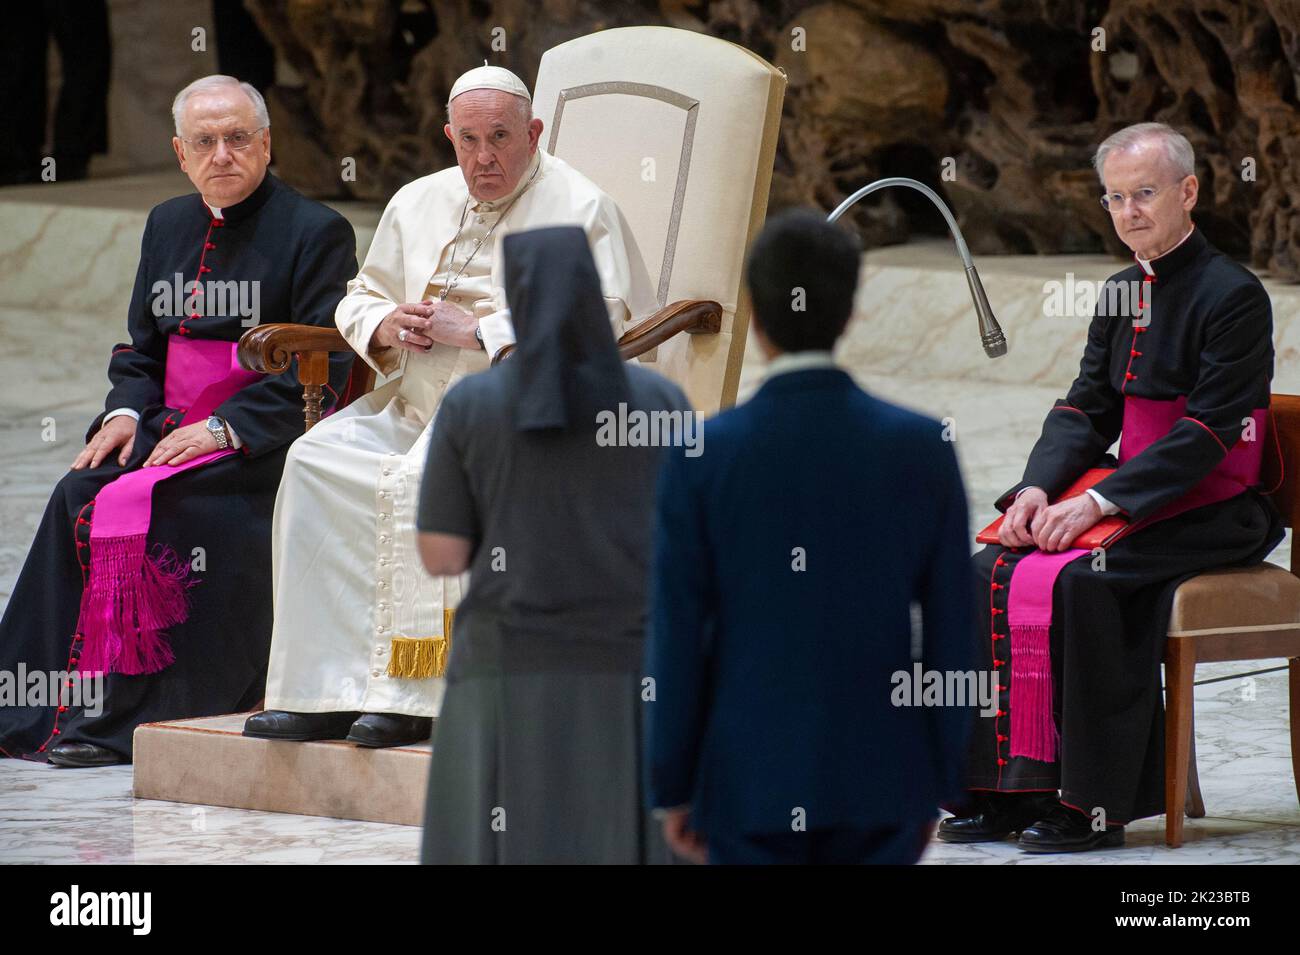 Rome, Italy. 22nd Sep, 2022. Italy, Rome, Vatican, 22/09/22. Pope Francis, flanked from left: Msgr. Leonardo Sapienza (L) and Msgr. Luis Maria Rodrigo Ewart (R) to leads his private audience with members of DELOITTE Global International in the Paul VI Hall. Italia, Roma, Vaticano, 22/09/22. Papa Francesco, affiancato da sinistra: Mons. Leonardo Sapienza (L) e Mons. Luis Maria Rodrigo Ewart (R), guida l'udienza privata con i membri di DELOITTE Global International nell'Aula Paolo VI. Photograph by Massimiliano MIGLIORATO/Catholic Press Photo Credit: Independent Photo Agency/Alamy Live News Stock Photo